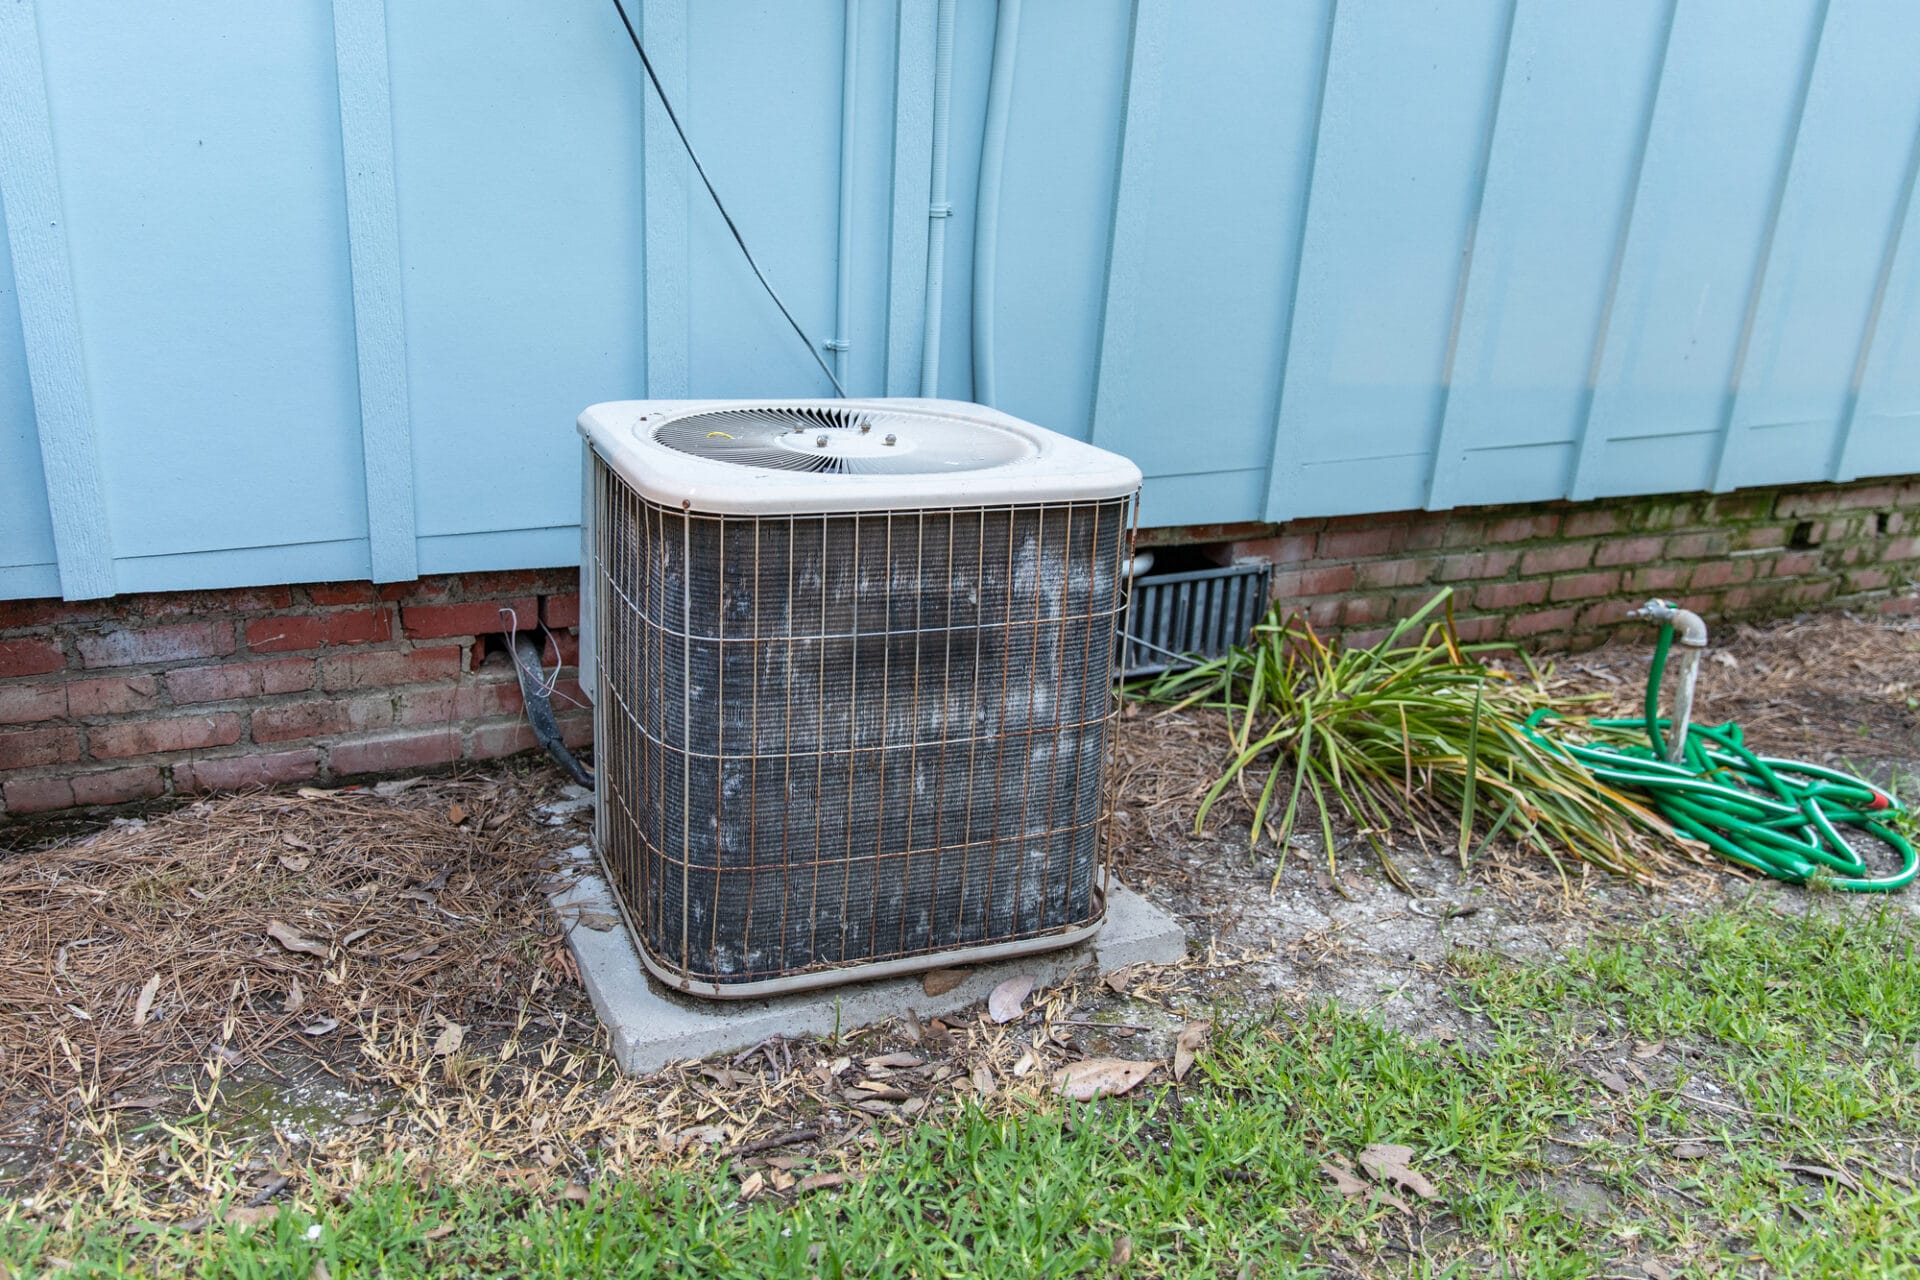 An outdoor air conditioning unit beside a house with a garden hose coiled nearby.